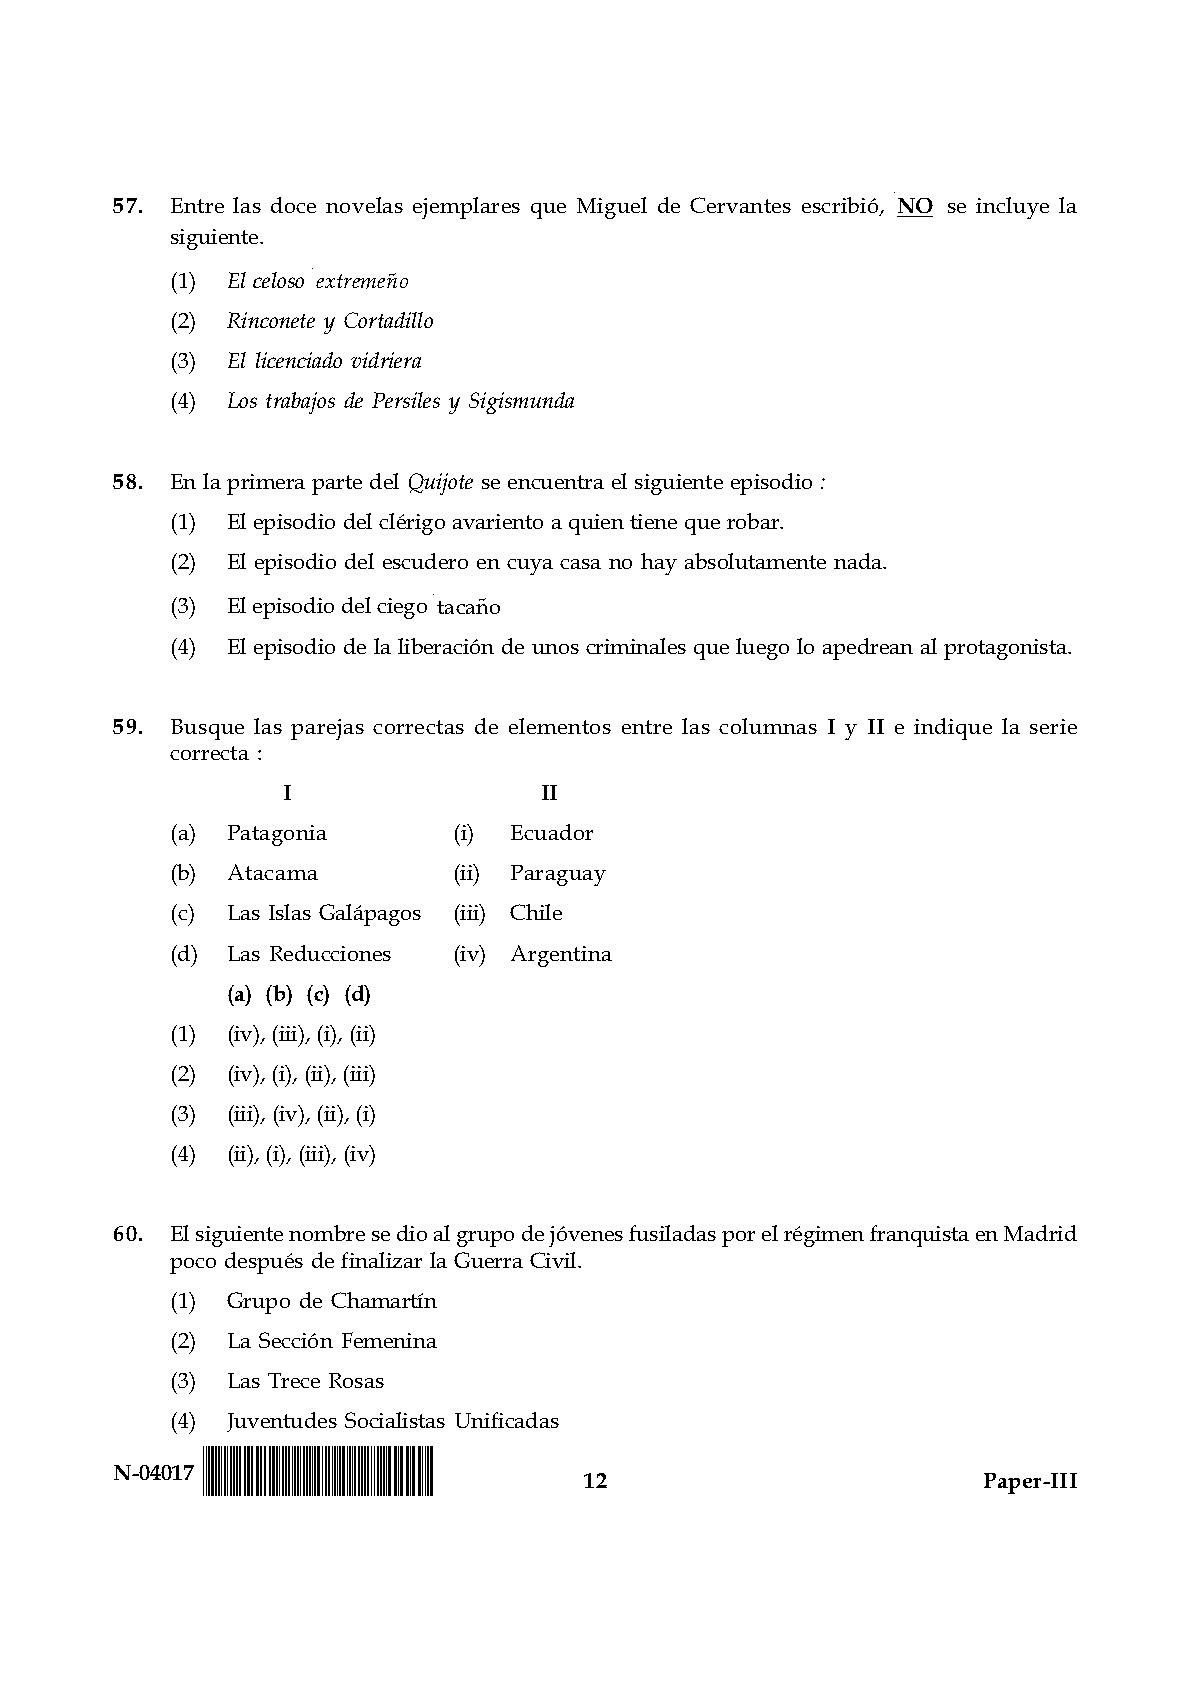 spanish-question-paper-iii-november-2017-ugc-net-previous-question-papers